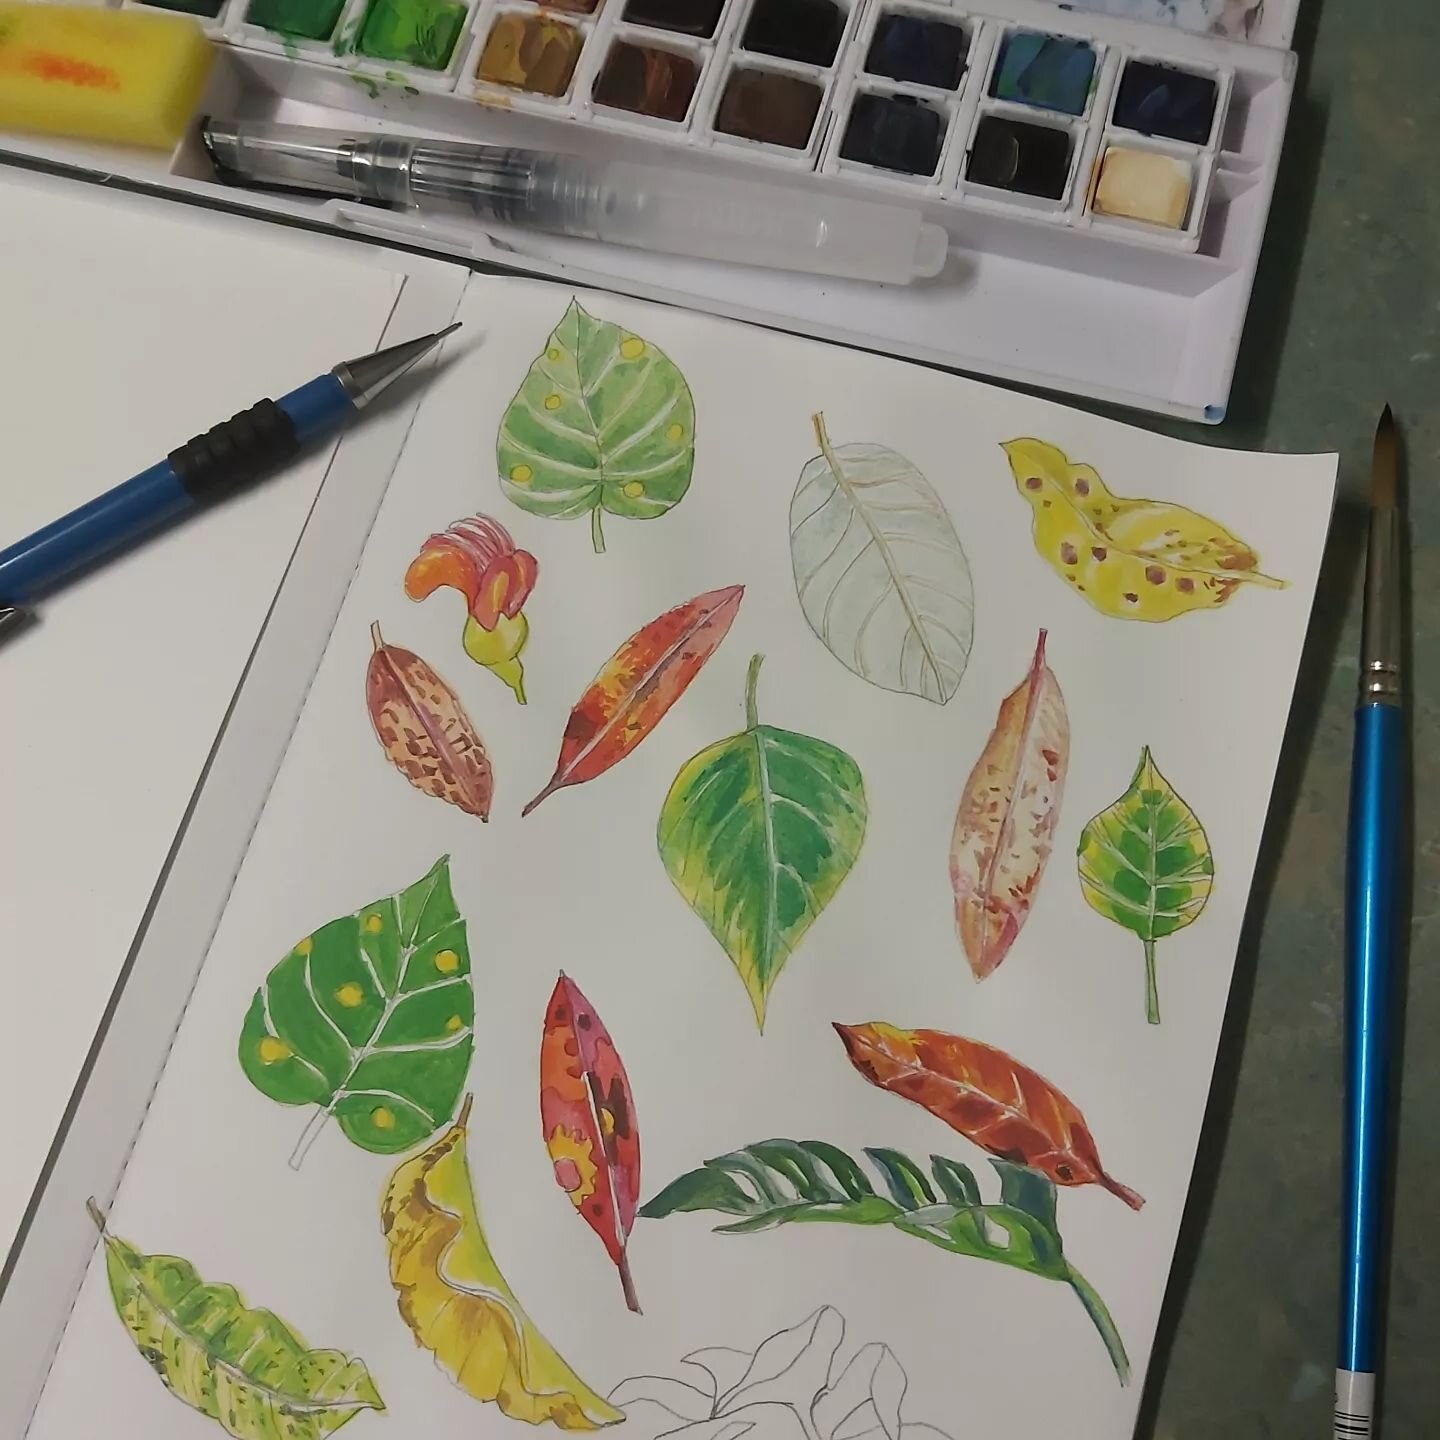 Last week, I took a walk in rainforest near Mission Beach, North Queensland. I was inspired to paint some leaf studies from the many leaves on the ground. I used inktense paints for these studies. #leaves #colourstudies #rainforestinspired #missionbe